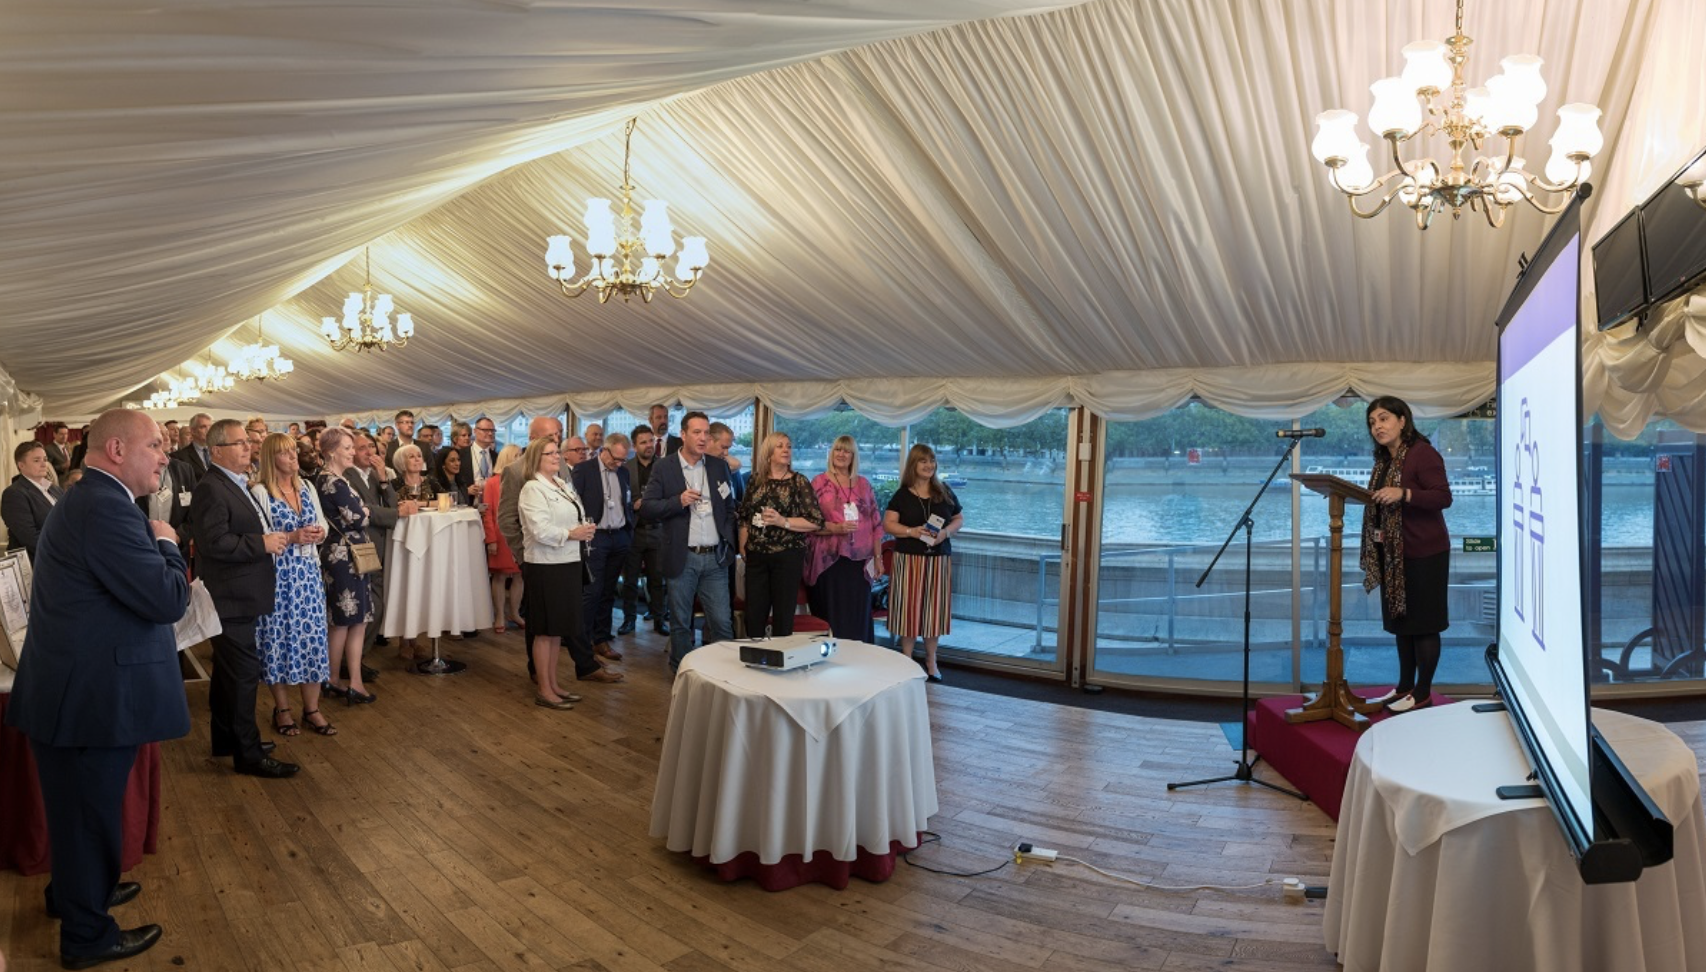 GOLD STAR: Claremont Centre recognised for excellence in House of Lords FIRA ceremony